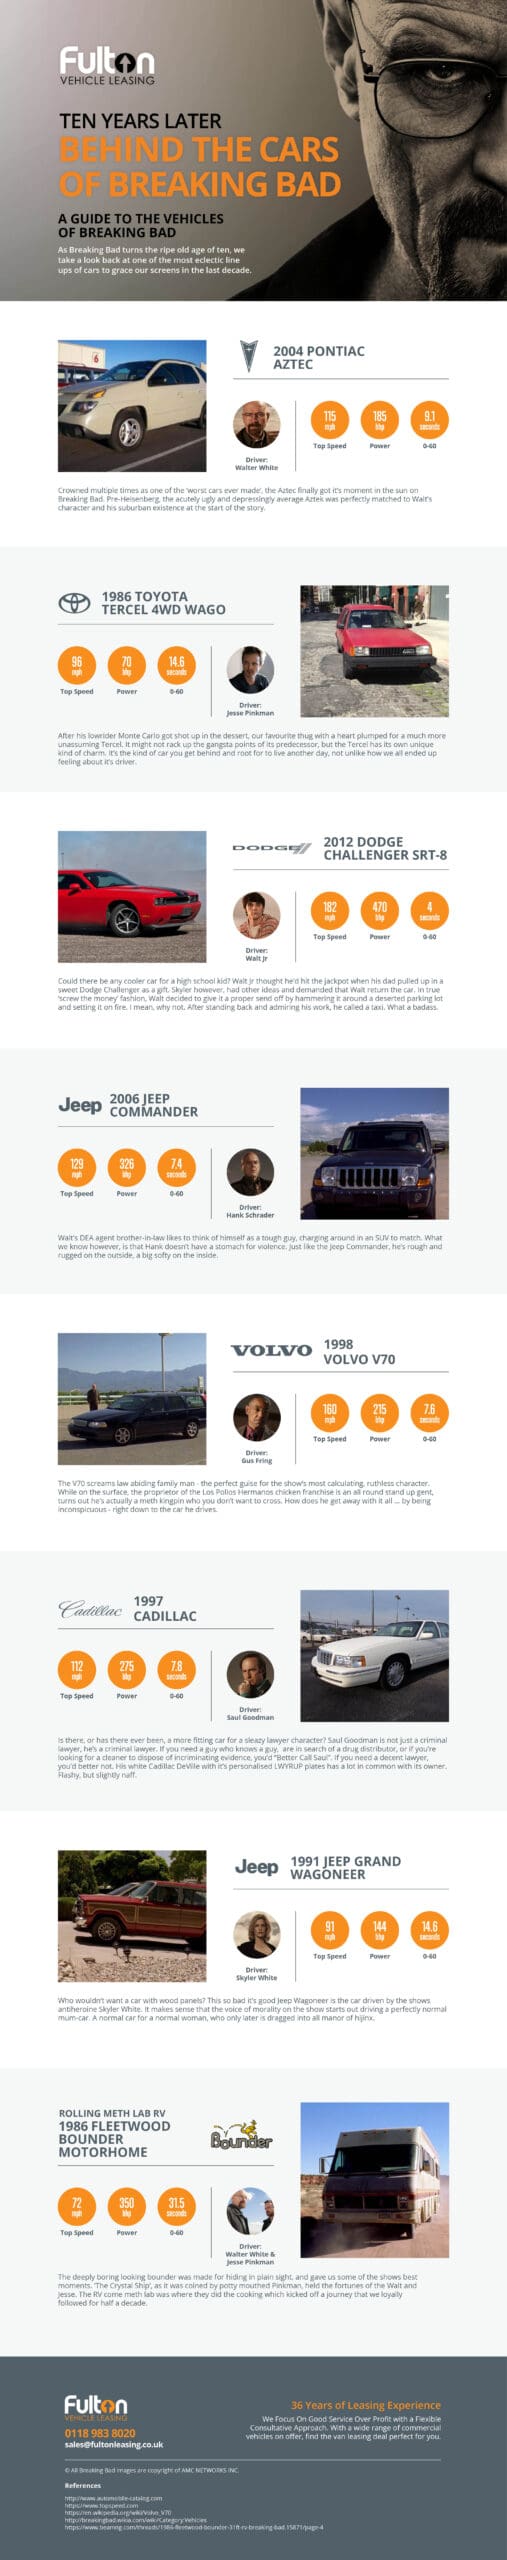 Visual Guide To The Vehicles of Breaking Bad - Breaking Bad 10th Anniversary: A Visual Guide To The Vehicles of Breaking Bad